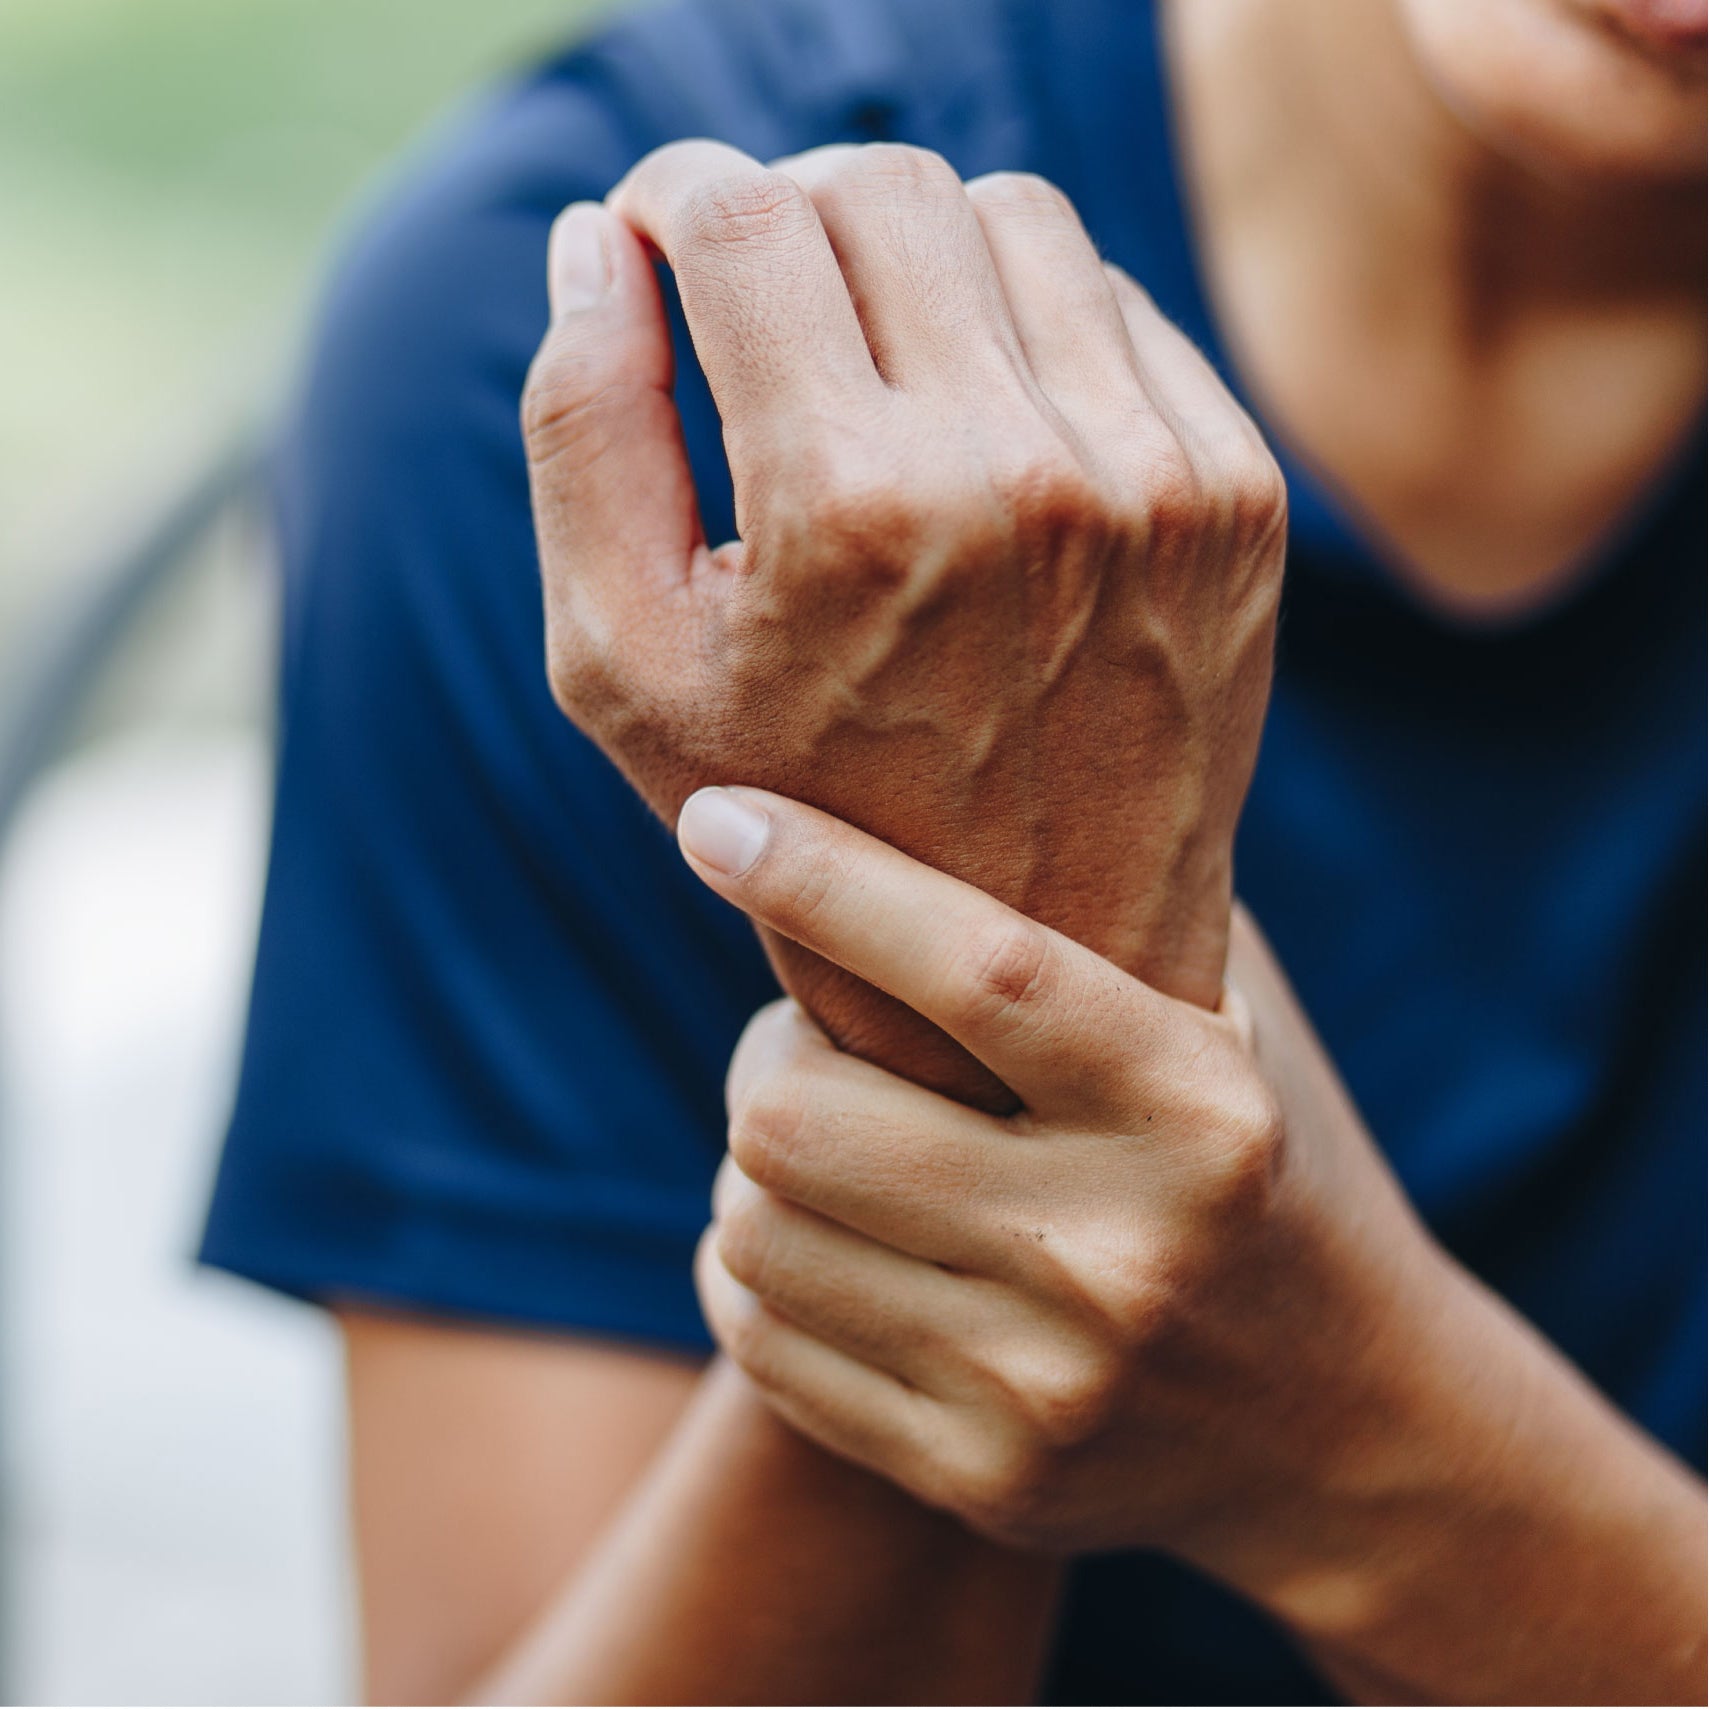 Hand and wrist pain: What causes it? What can you do about it?